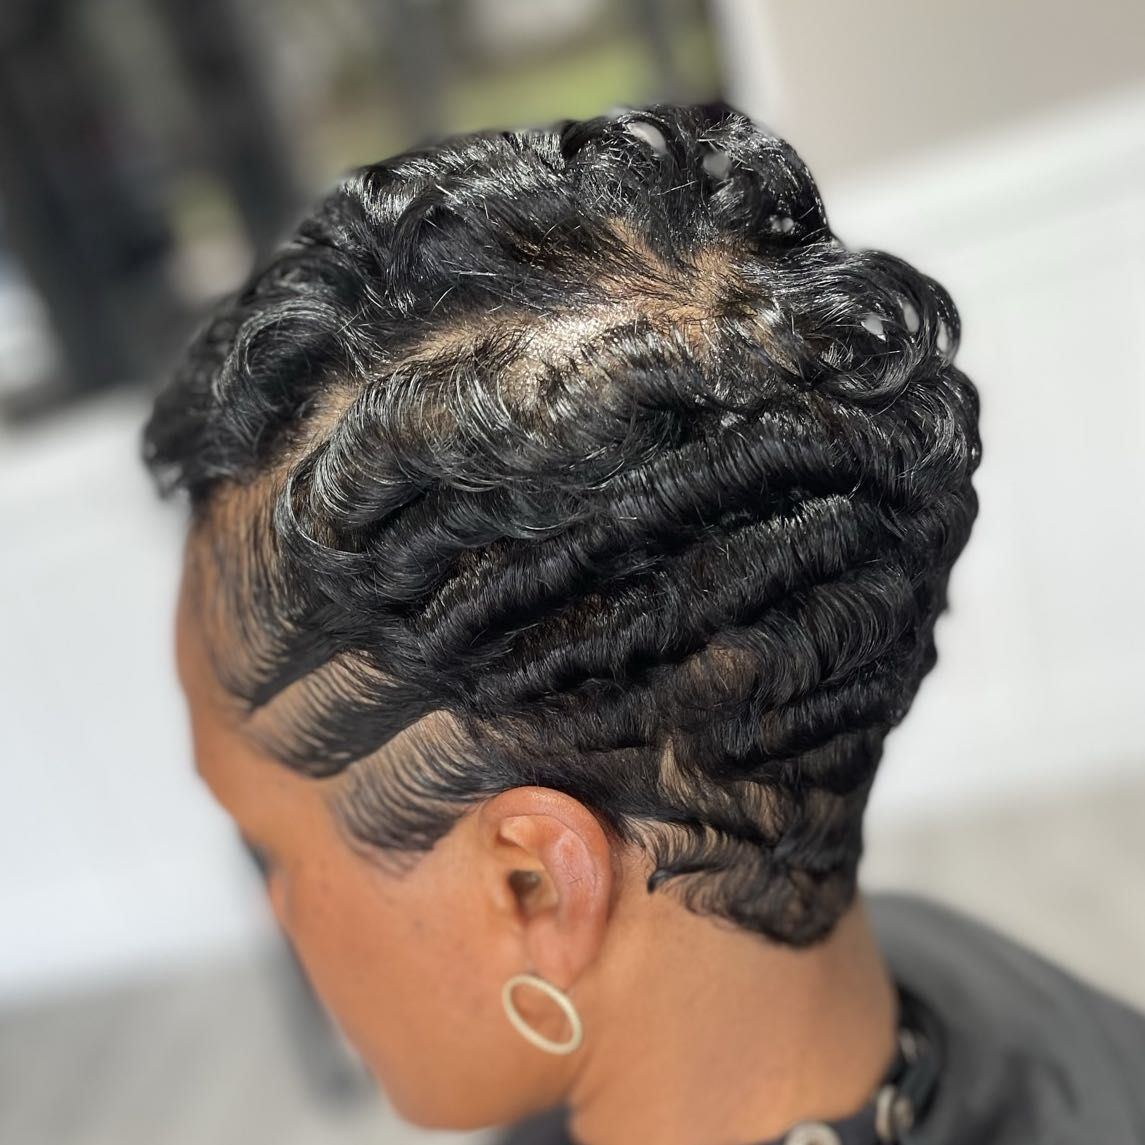 Relaxer (Root touch up) portfolio